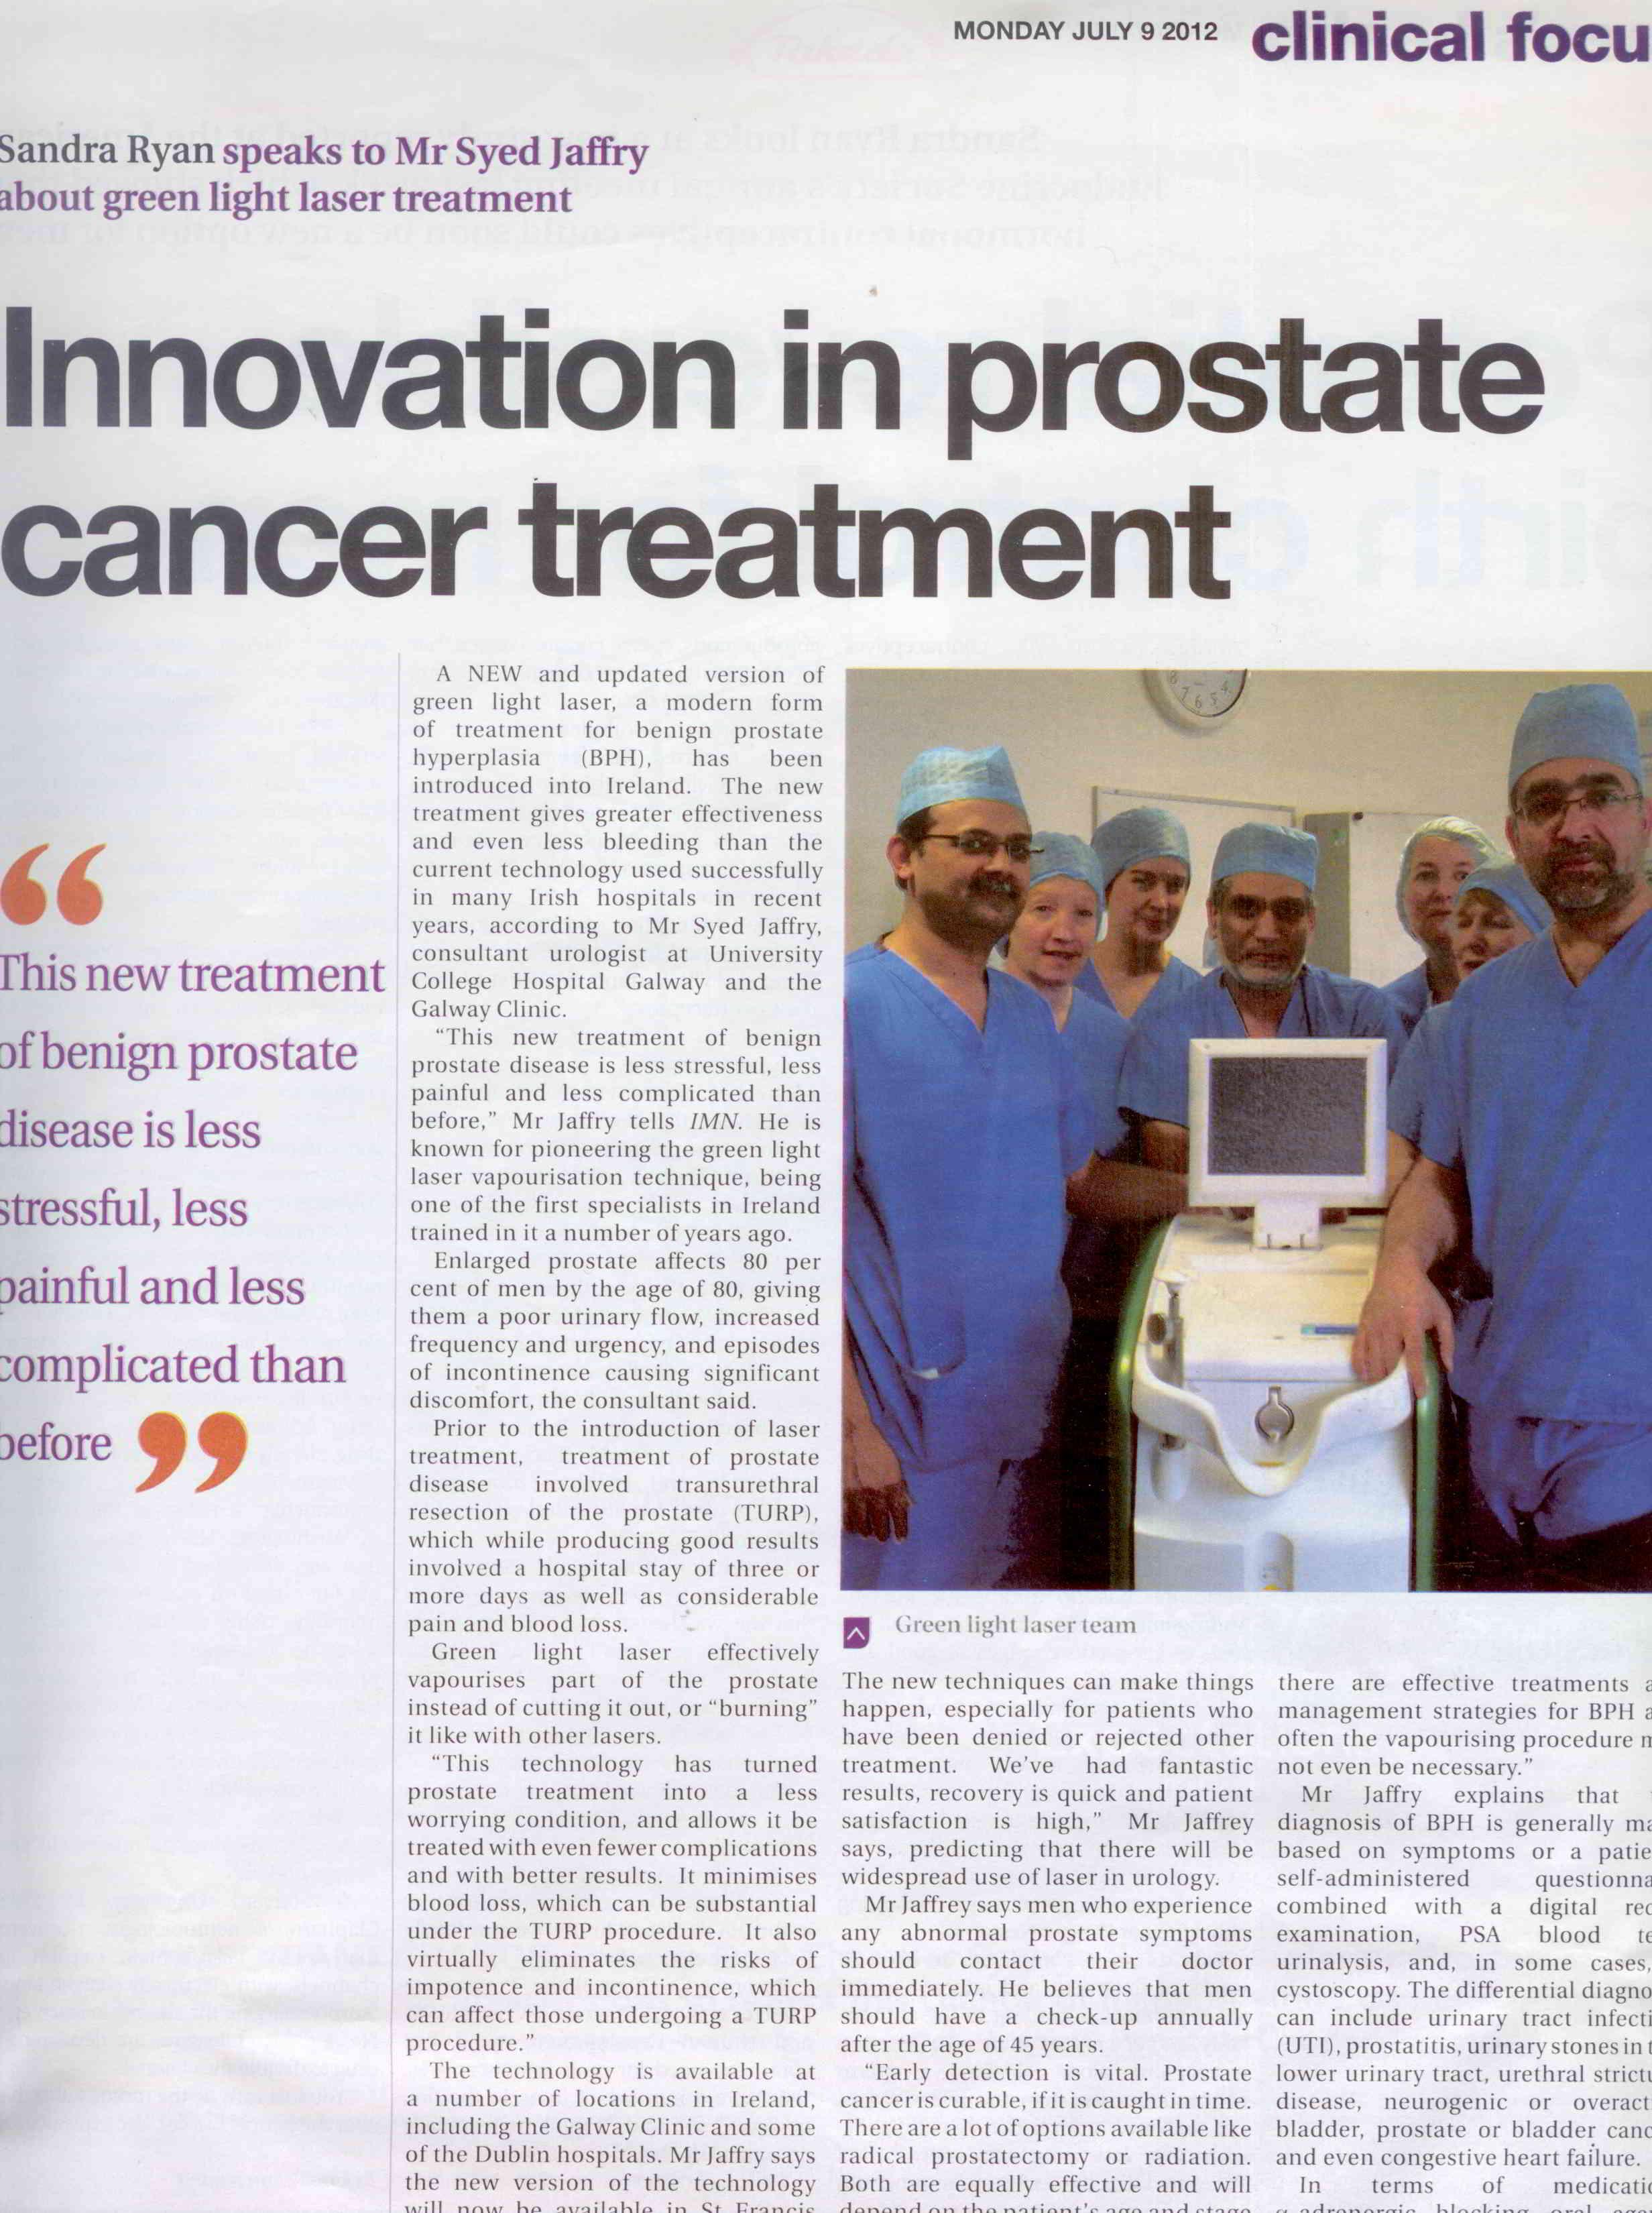 Innovation in Prostate Cancer Treatment